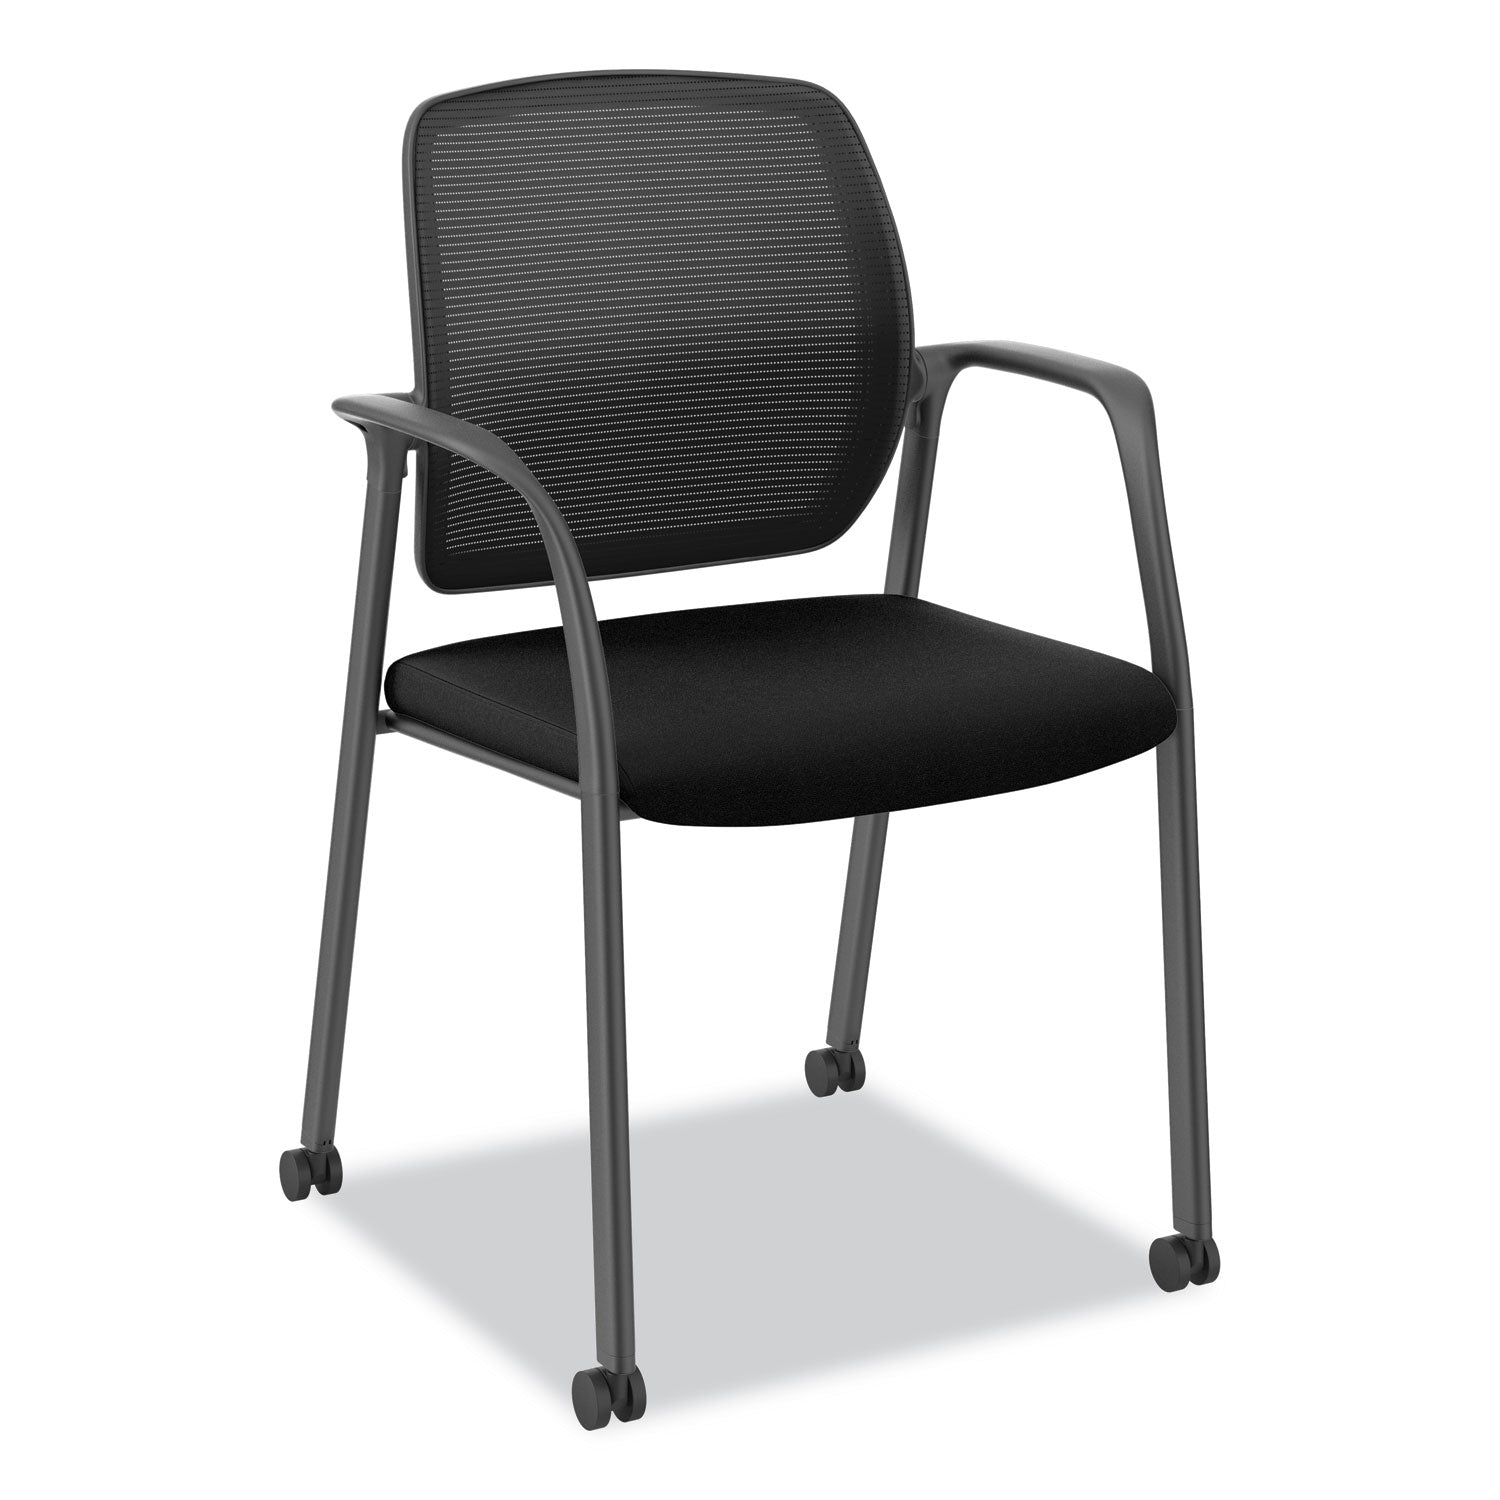 nucleus-series-recharge-guest-chair-supports-up-to-300-lb-1762-seat-height-black-seat-back-black-base_honnr6fmc10p71 - 1